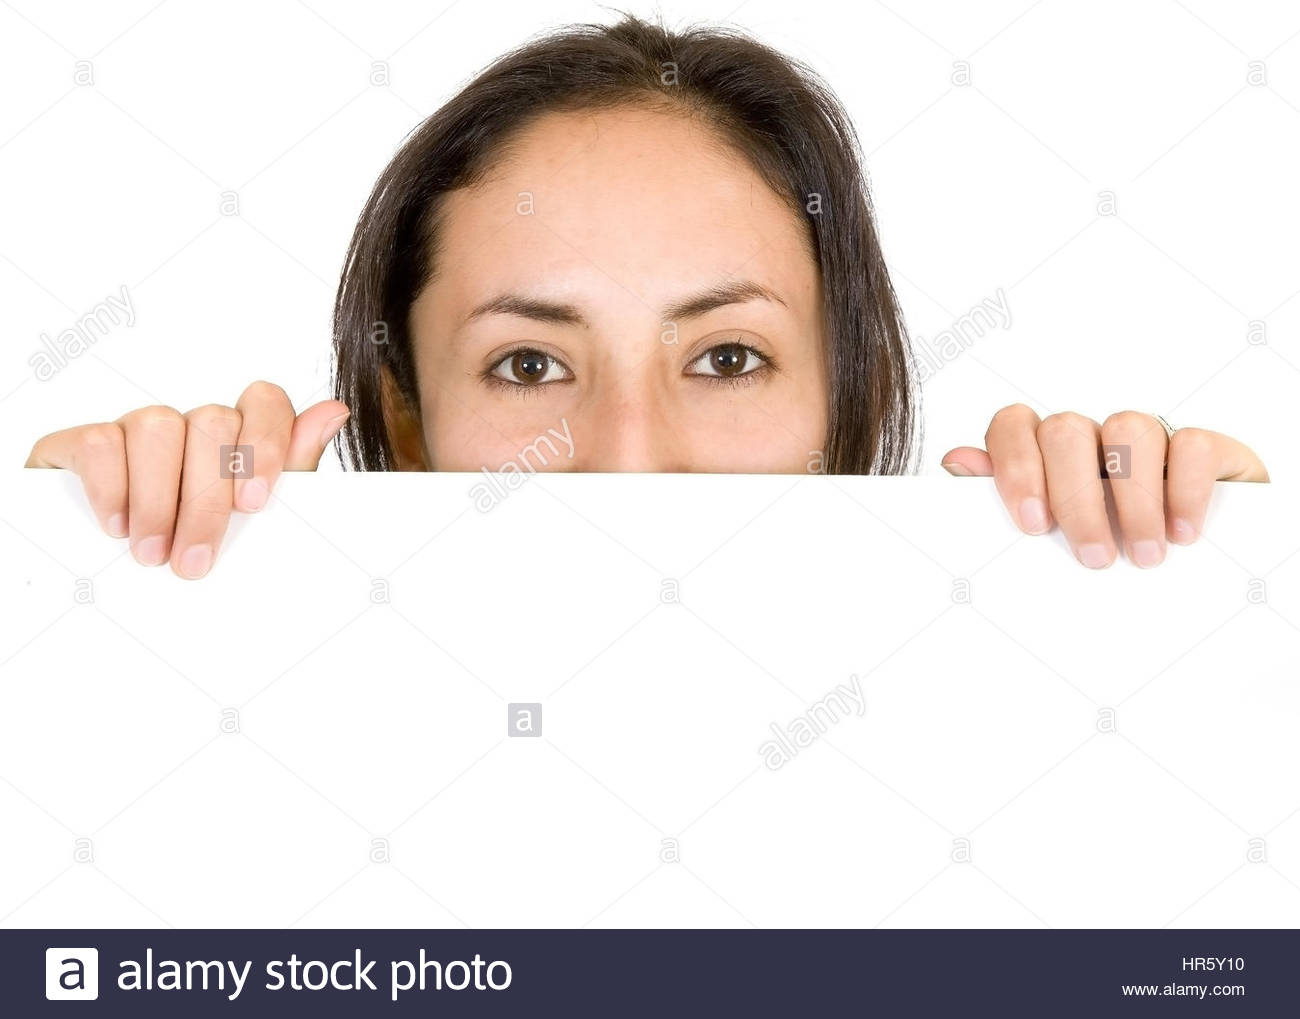 Young Girl Peeping Over A White Banner Whte Background